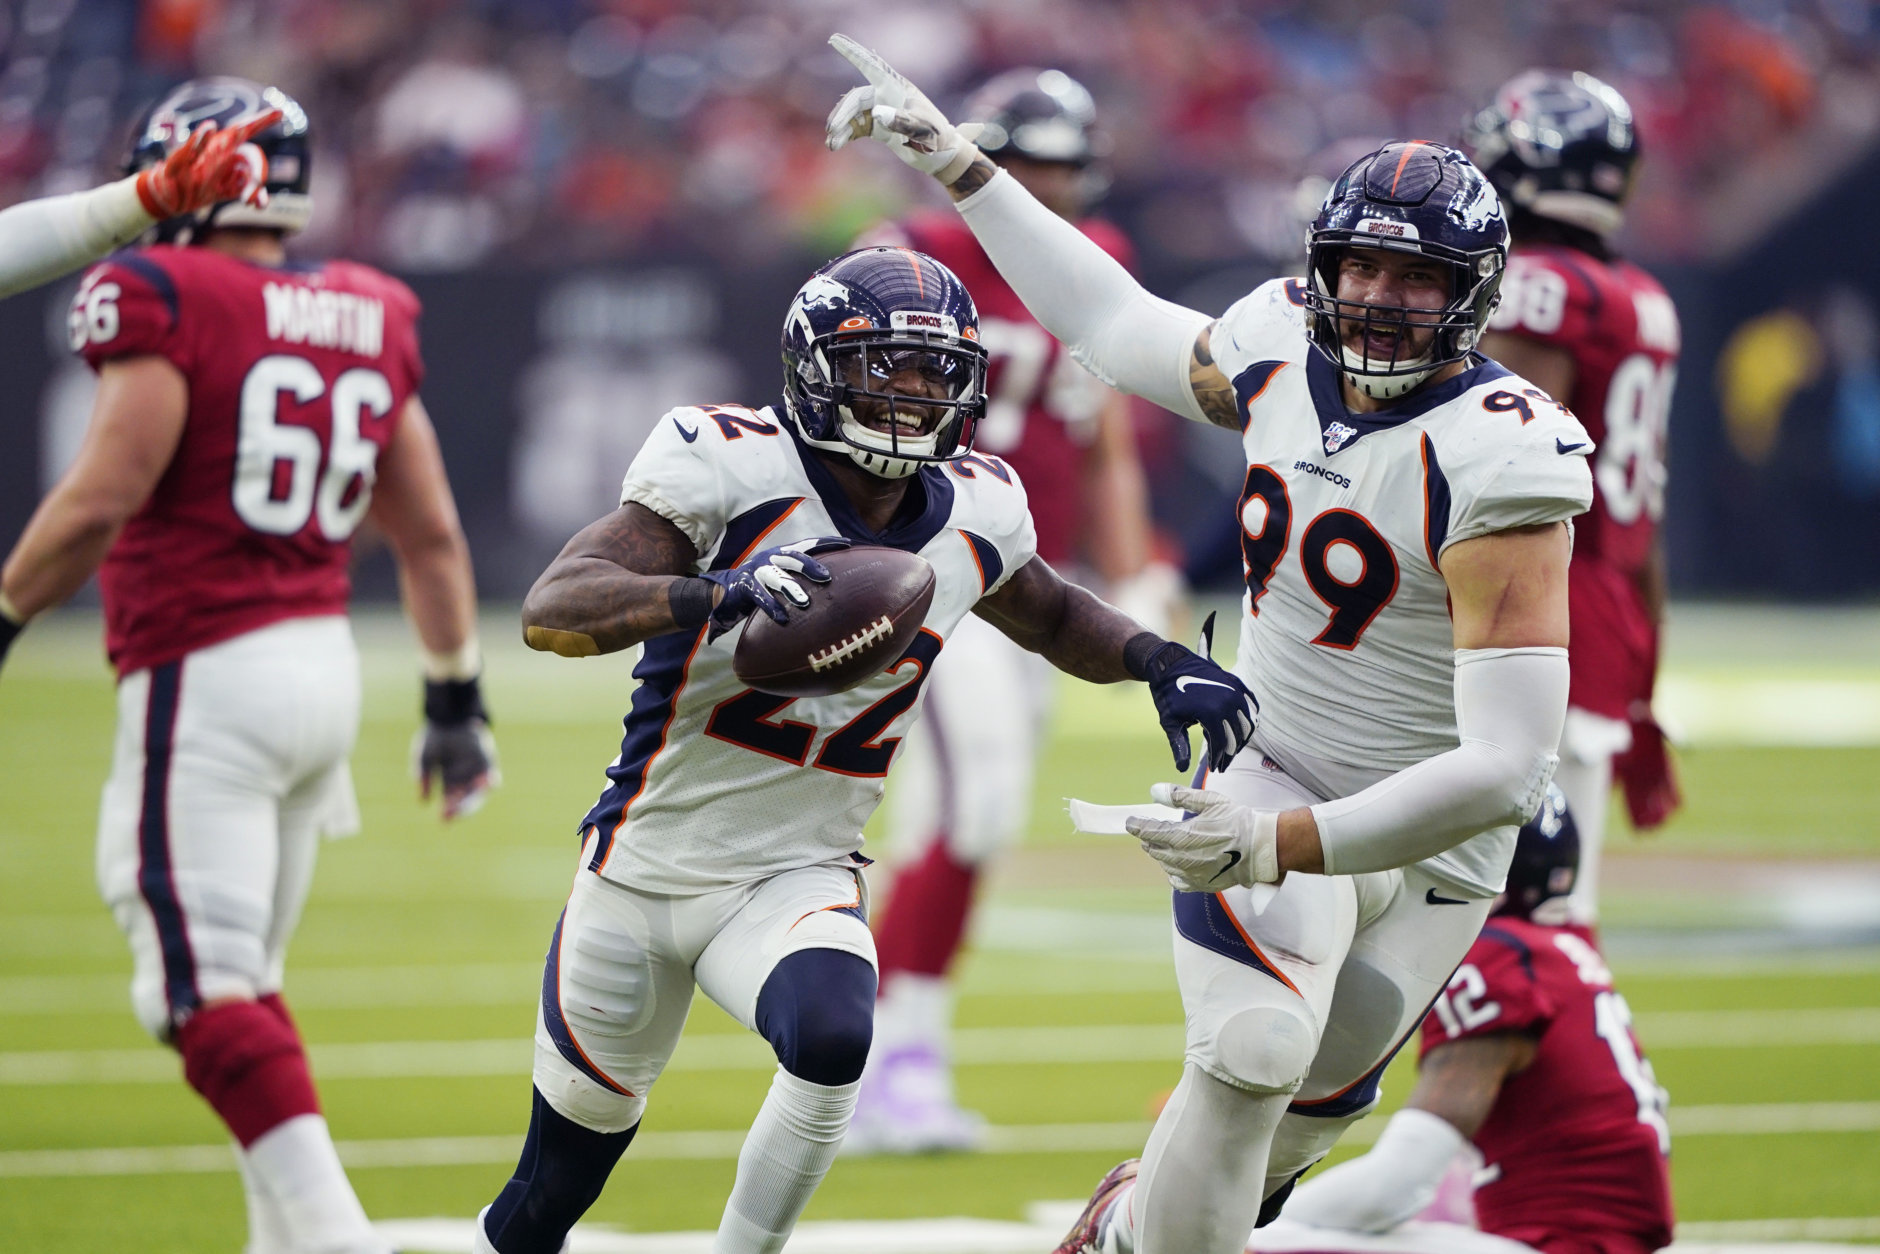 <p><b><i>Broncos 38</i></b><br />
<b><i>Texans 24</i></b></p>
<p>Houston has a problem. Rookie Drew Lock had a near-perfect passer rating in the first half of his second start and <a href="https://profootballtalk.nbcsports.com/2019/12/08/kareem-jackson-has-interception-fumble-return-for-touchdown/" target="_blank" rel="noopener">Kareem Jackson tormented his former team</a> to deal the Texans a terrible loss that basically offsets last week&#8217;s quality win over the Patriots. If Houston fails to win their division, we&#8217;ll remember this loss a lot more than we&#8217;ll remember their <a href="https://twitter.com/HoustonTexans/status/1203694582141046784?s=20" target="_blank" rel="noopener">linebackers&#8217; weekly dress-up routine</a>.</p>
